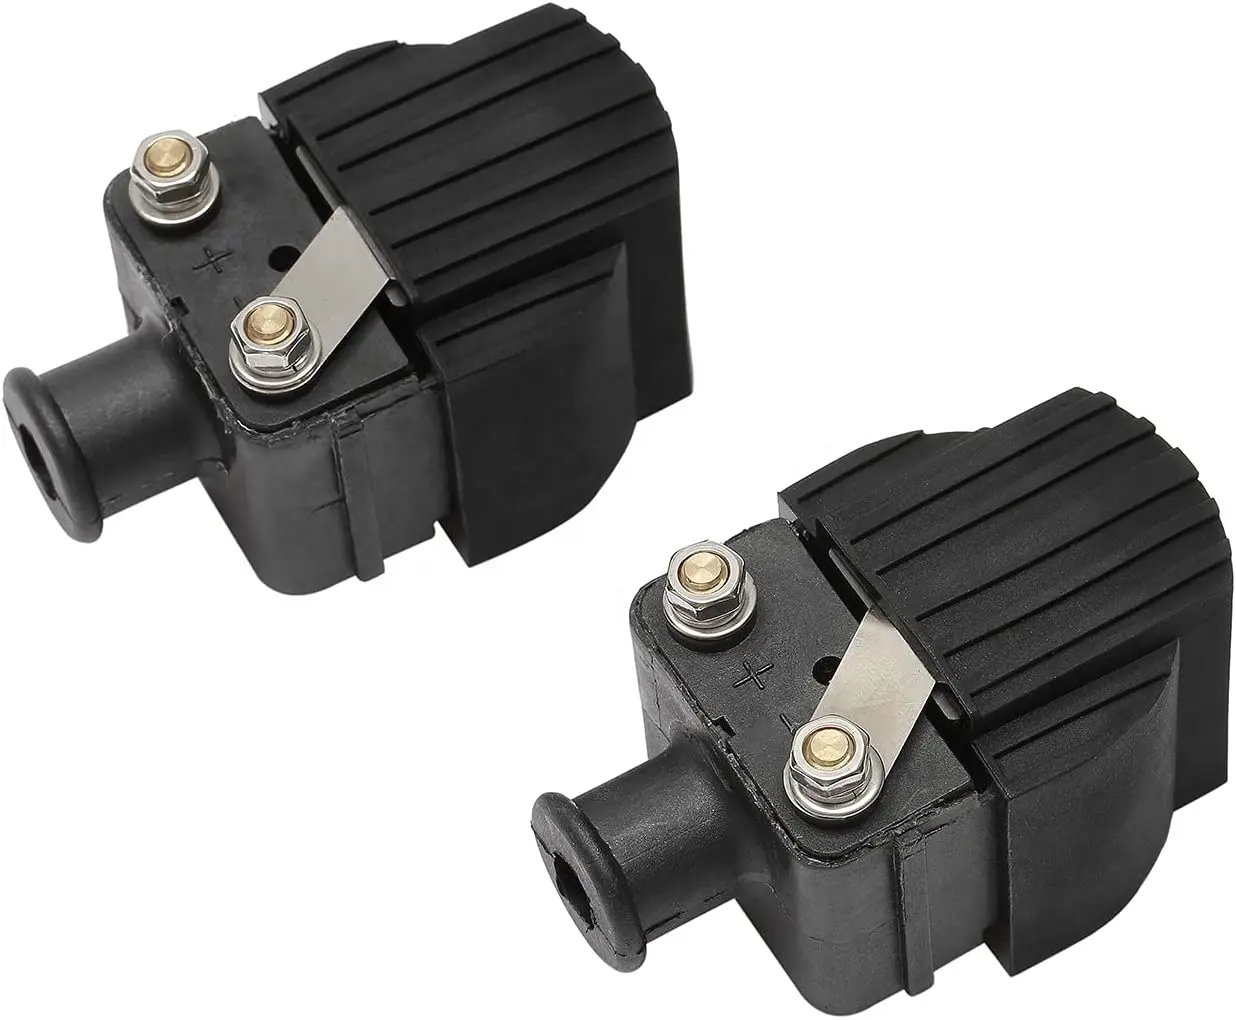 2Pcs 18-5186 Ignition Coil Compatible with Mercury   Mariner Outboard Boat 6-125HP 140HP V135 V150 210CC Chrysler Force 40hp -15